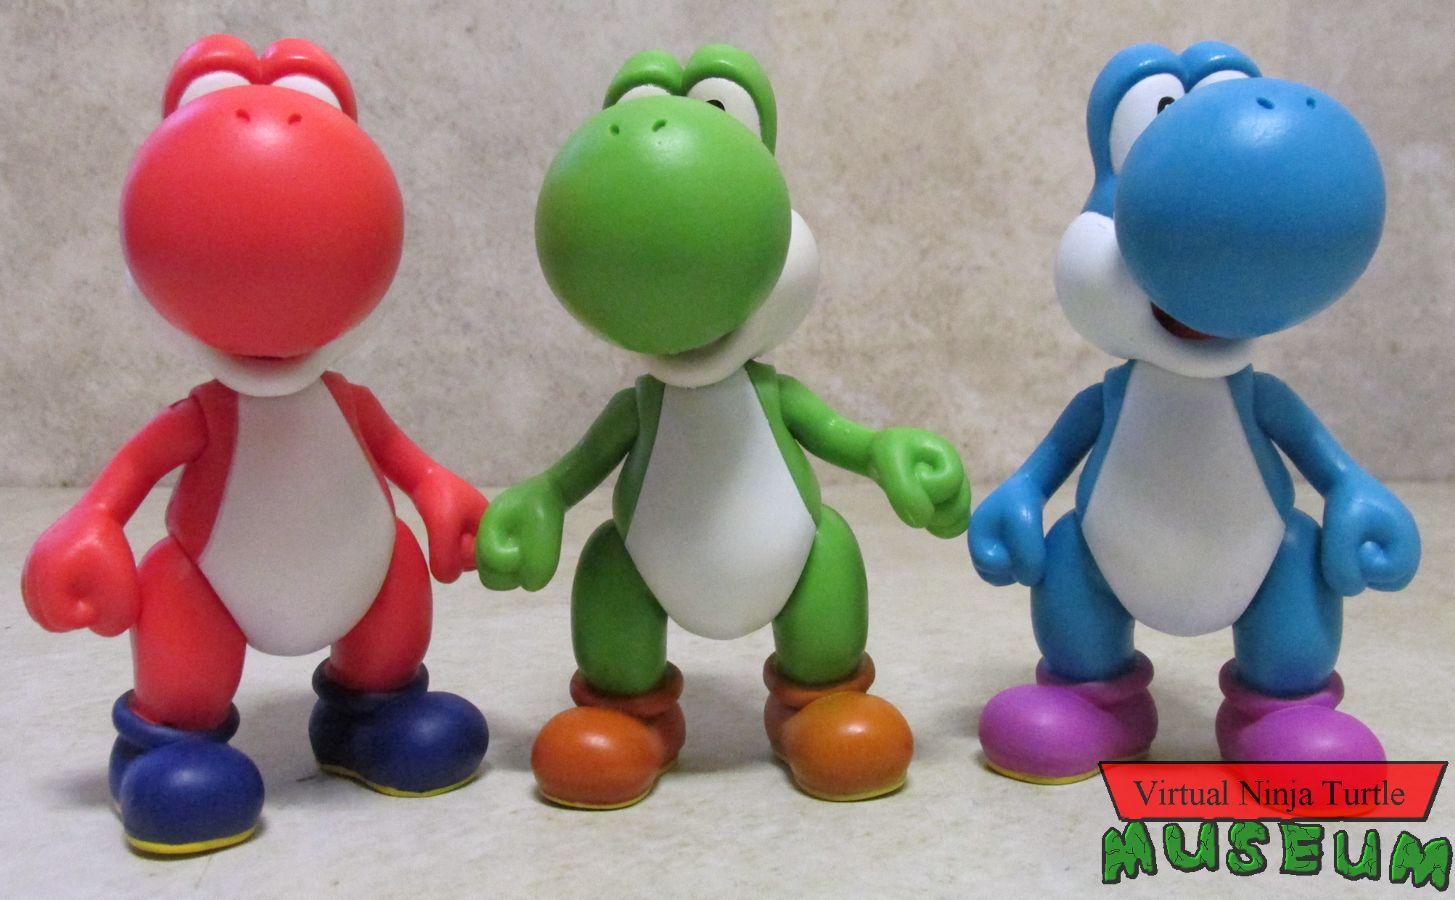 blue, green and red Yoshis